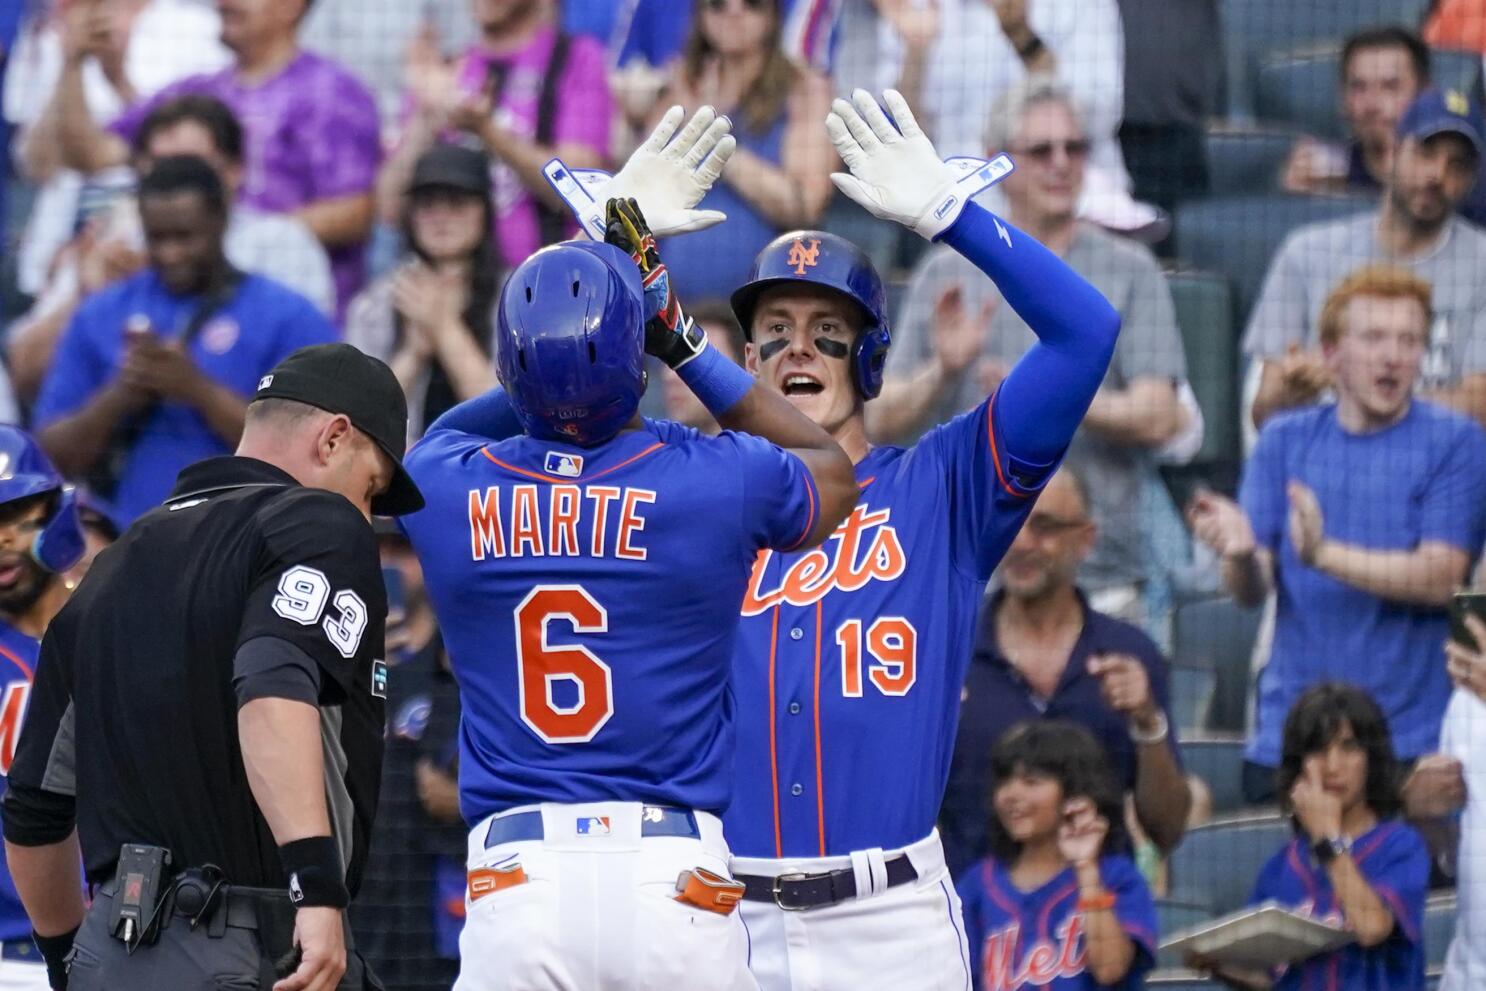 Canha has 4 of Mets' 17 hits to rout Nats, 5th win in row